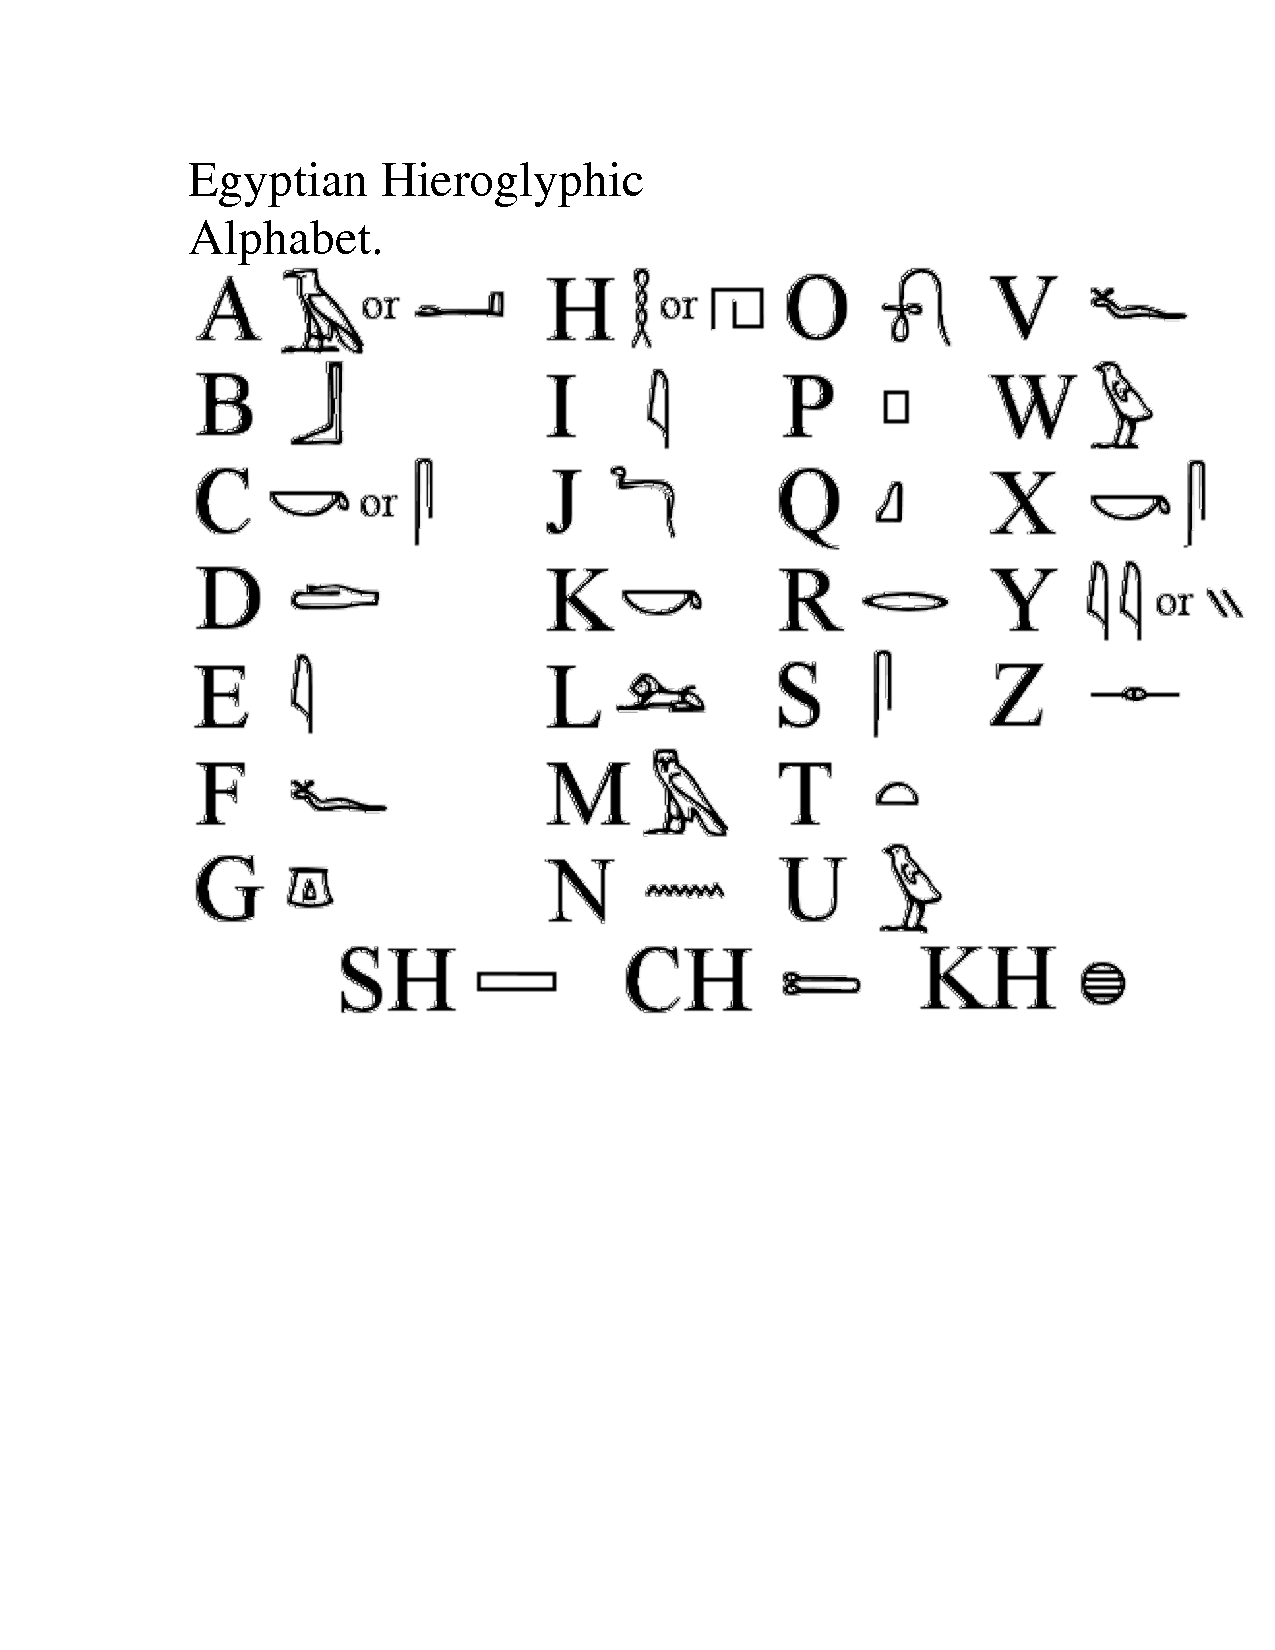 10 Best Images of Hieroglyphic Writing In Pictures Worksheet - Egyptian ...